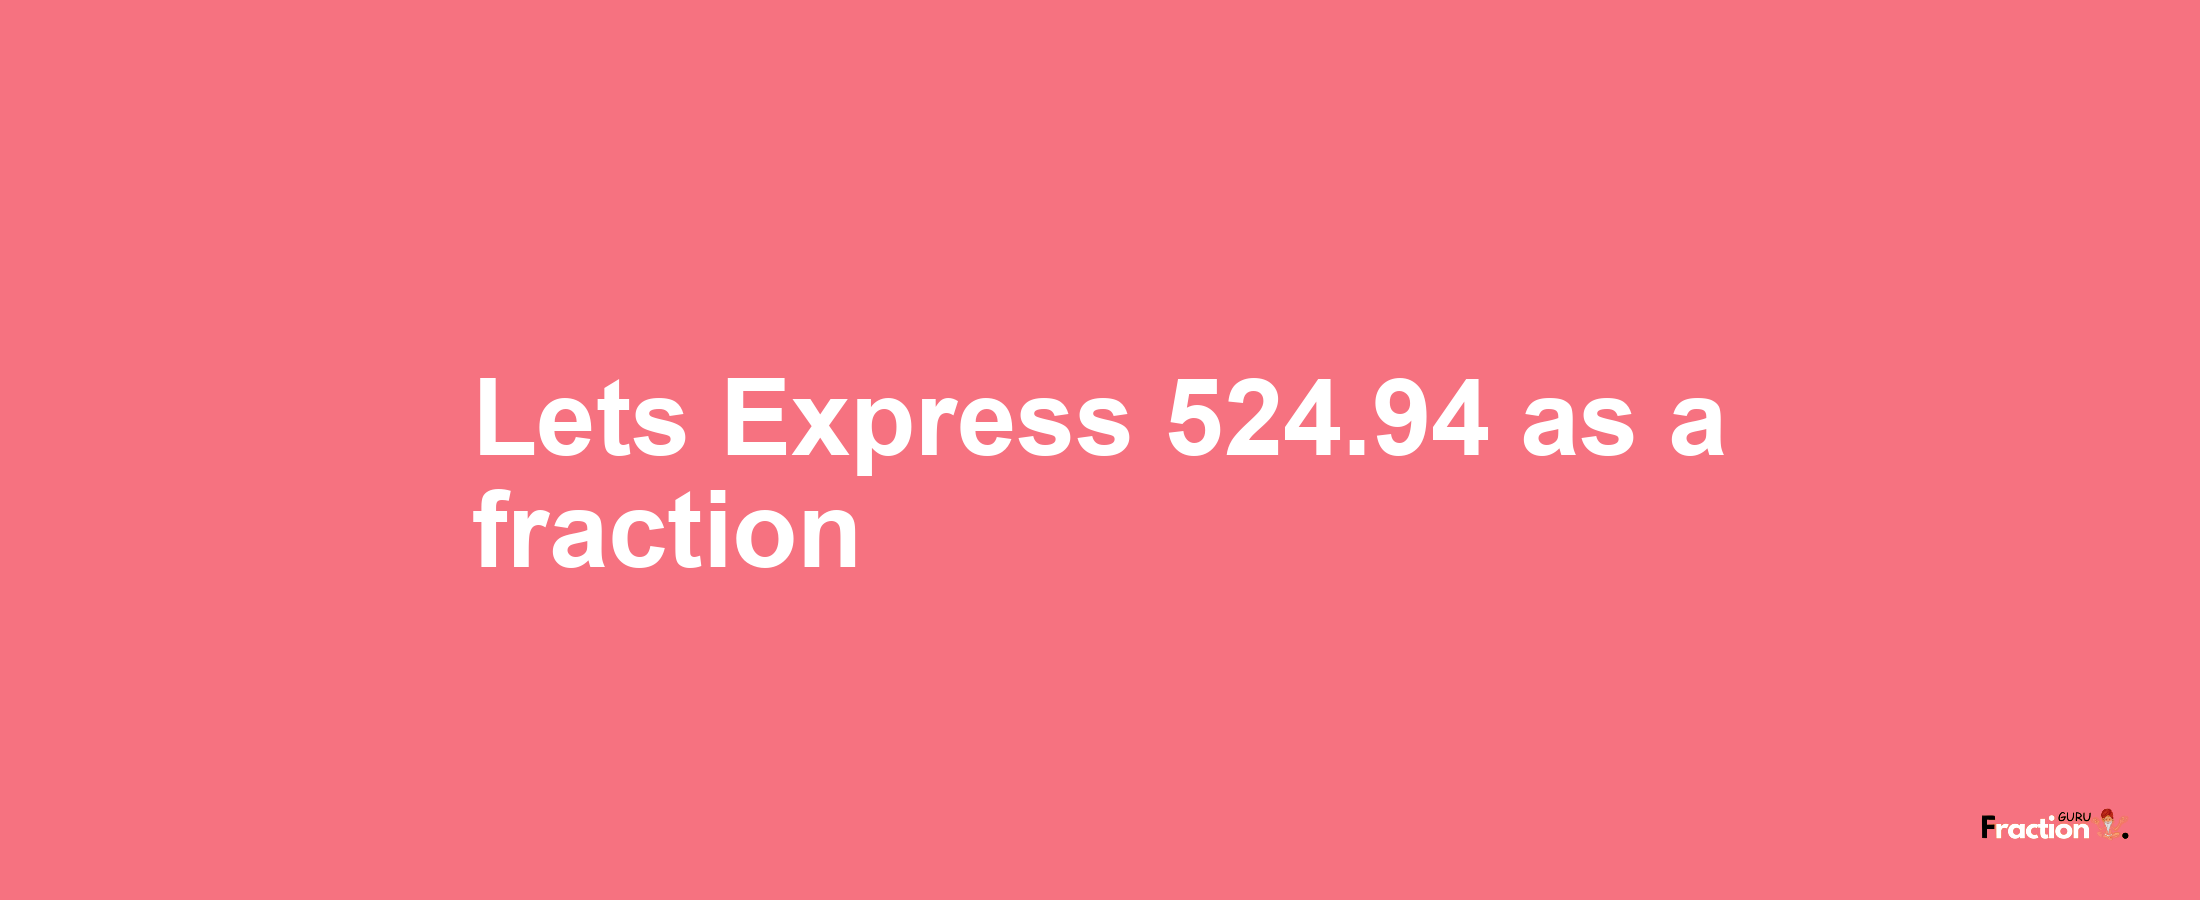 Lets Express 524.94 as afraction